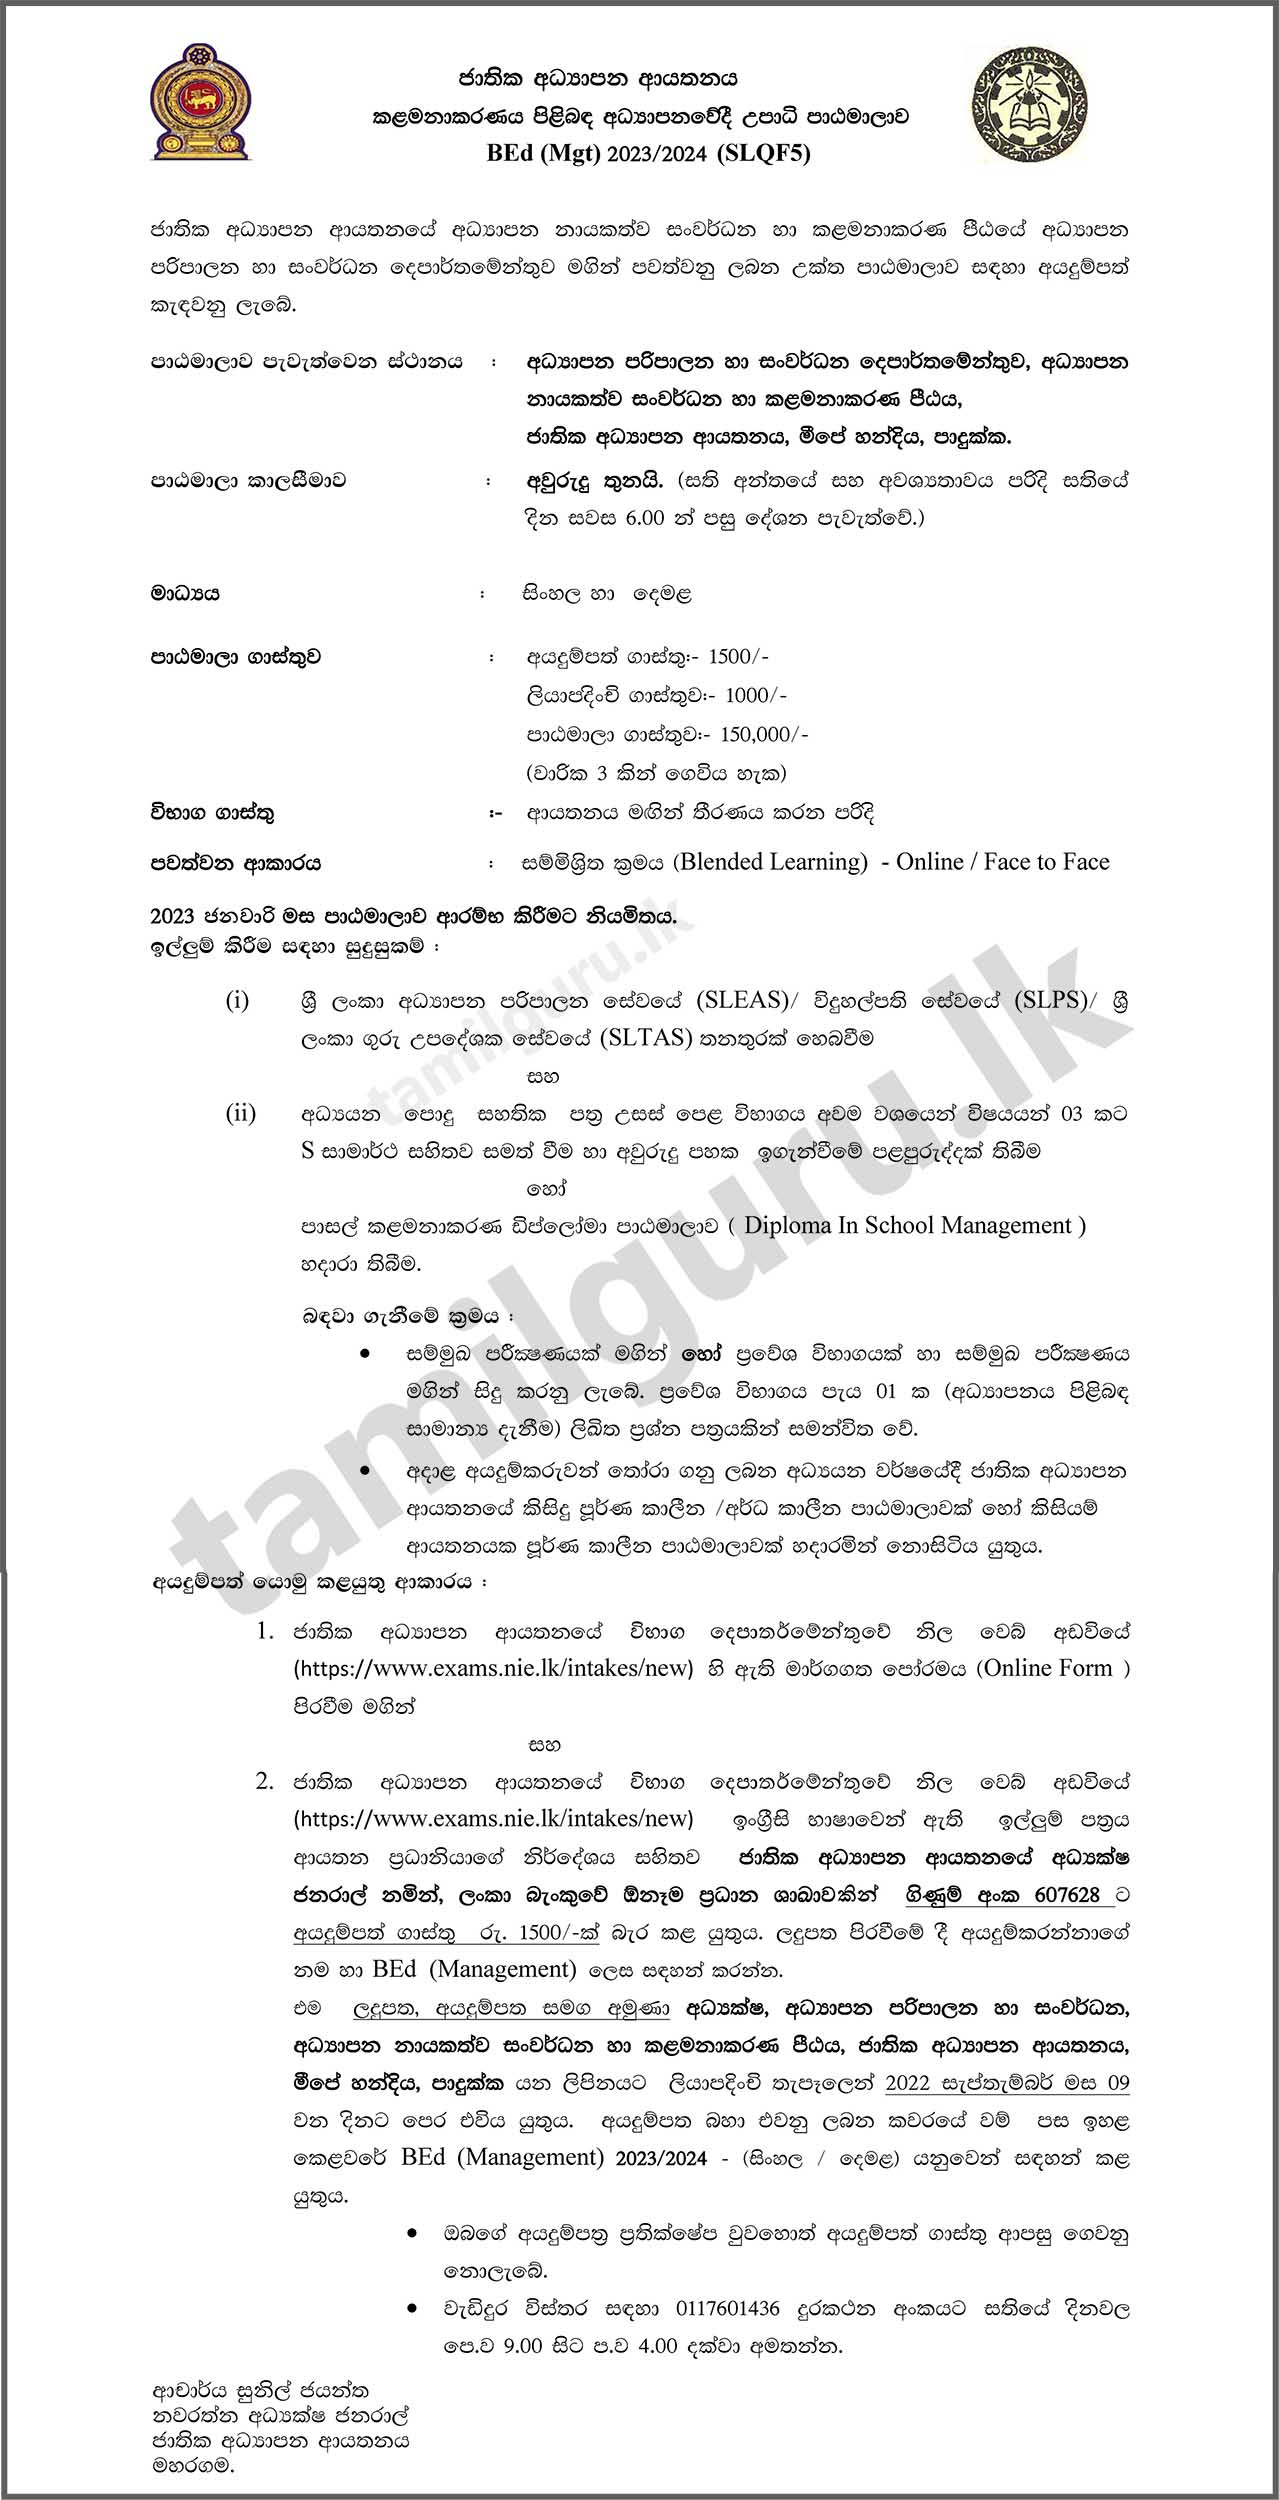 Bachelor of Education Management (BEdMgt) 2022 - National Institute of Education (NIE) (Details in Sinhala)